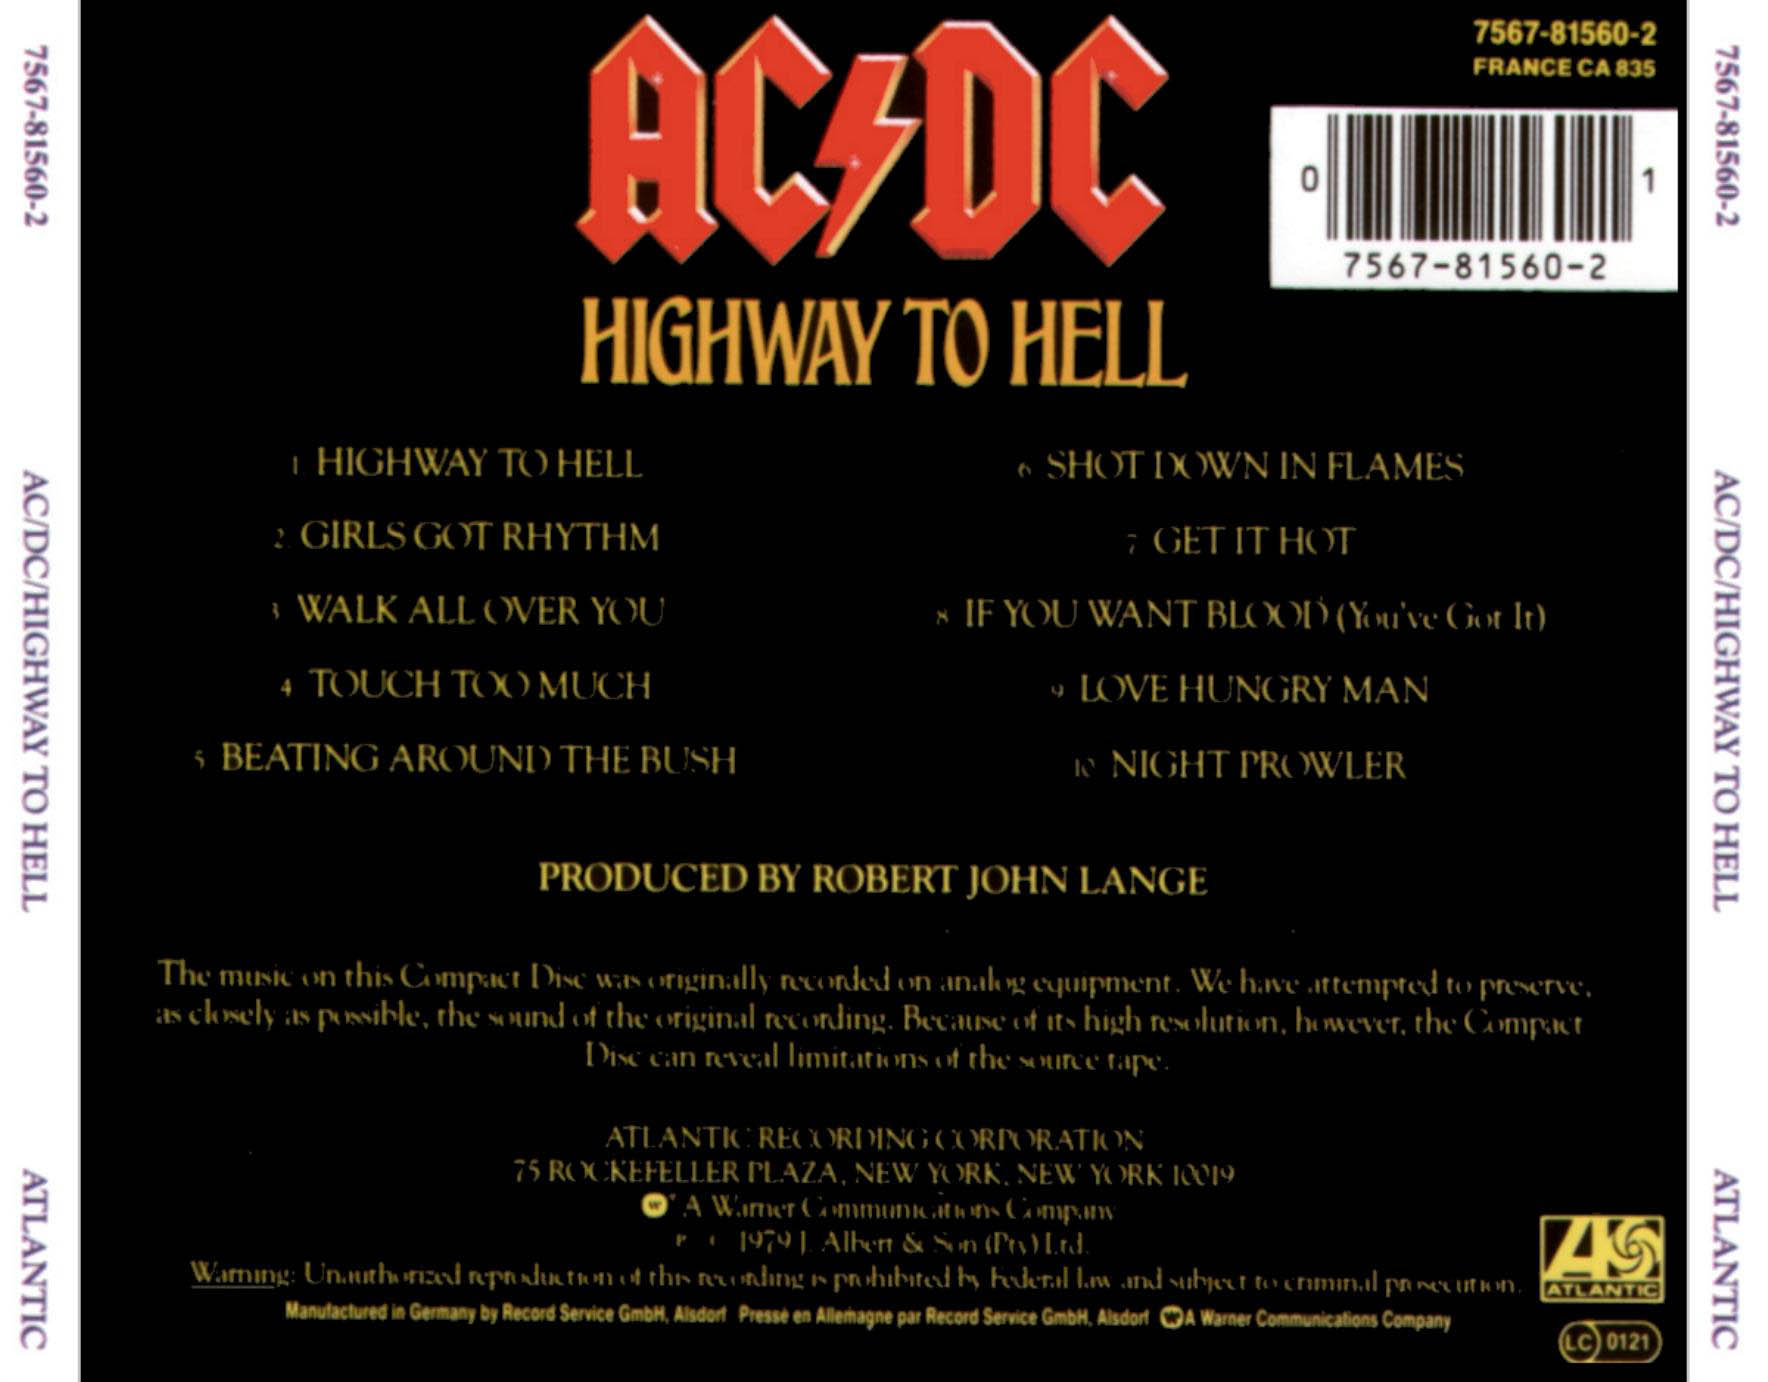 Acdc highway to hell. Highway to Hell 1979 обложка. AC DC Highway to Hell 1979. AC DC Highway to Hell обложка. AC DC Highway to Hell 1979 обложка CD.